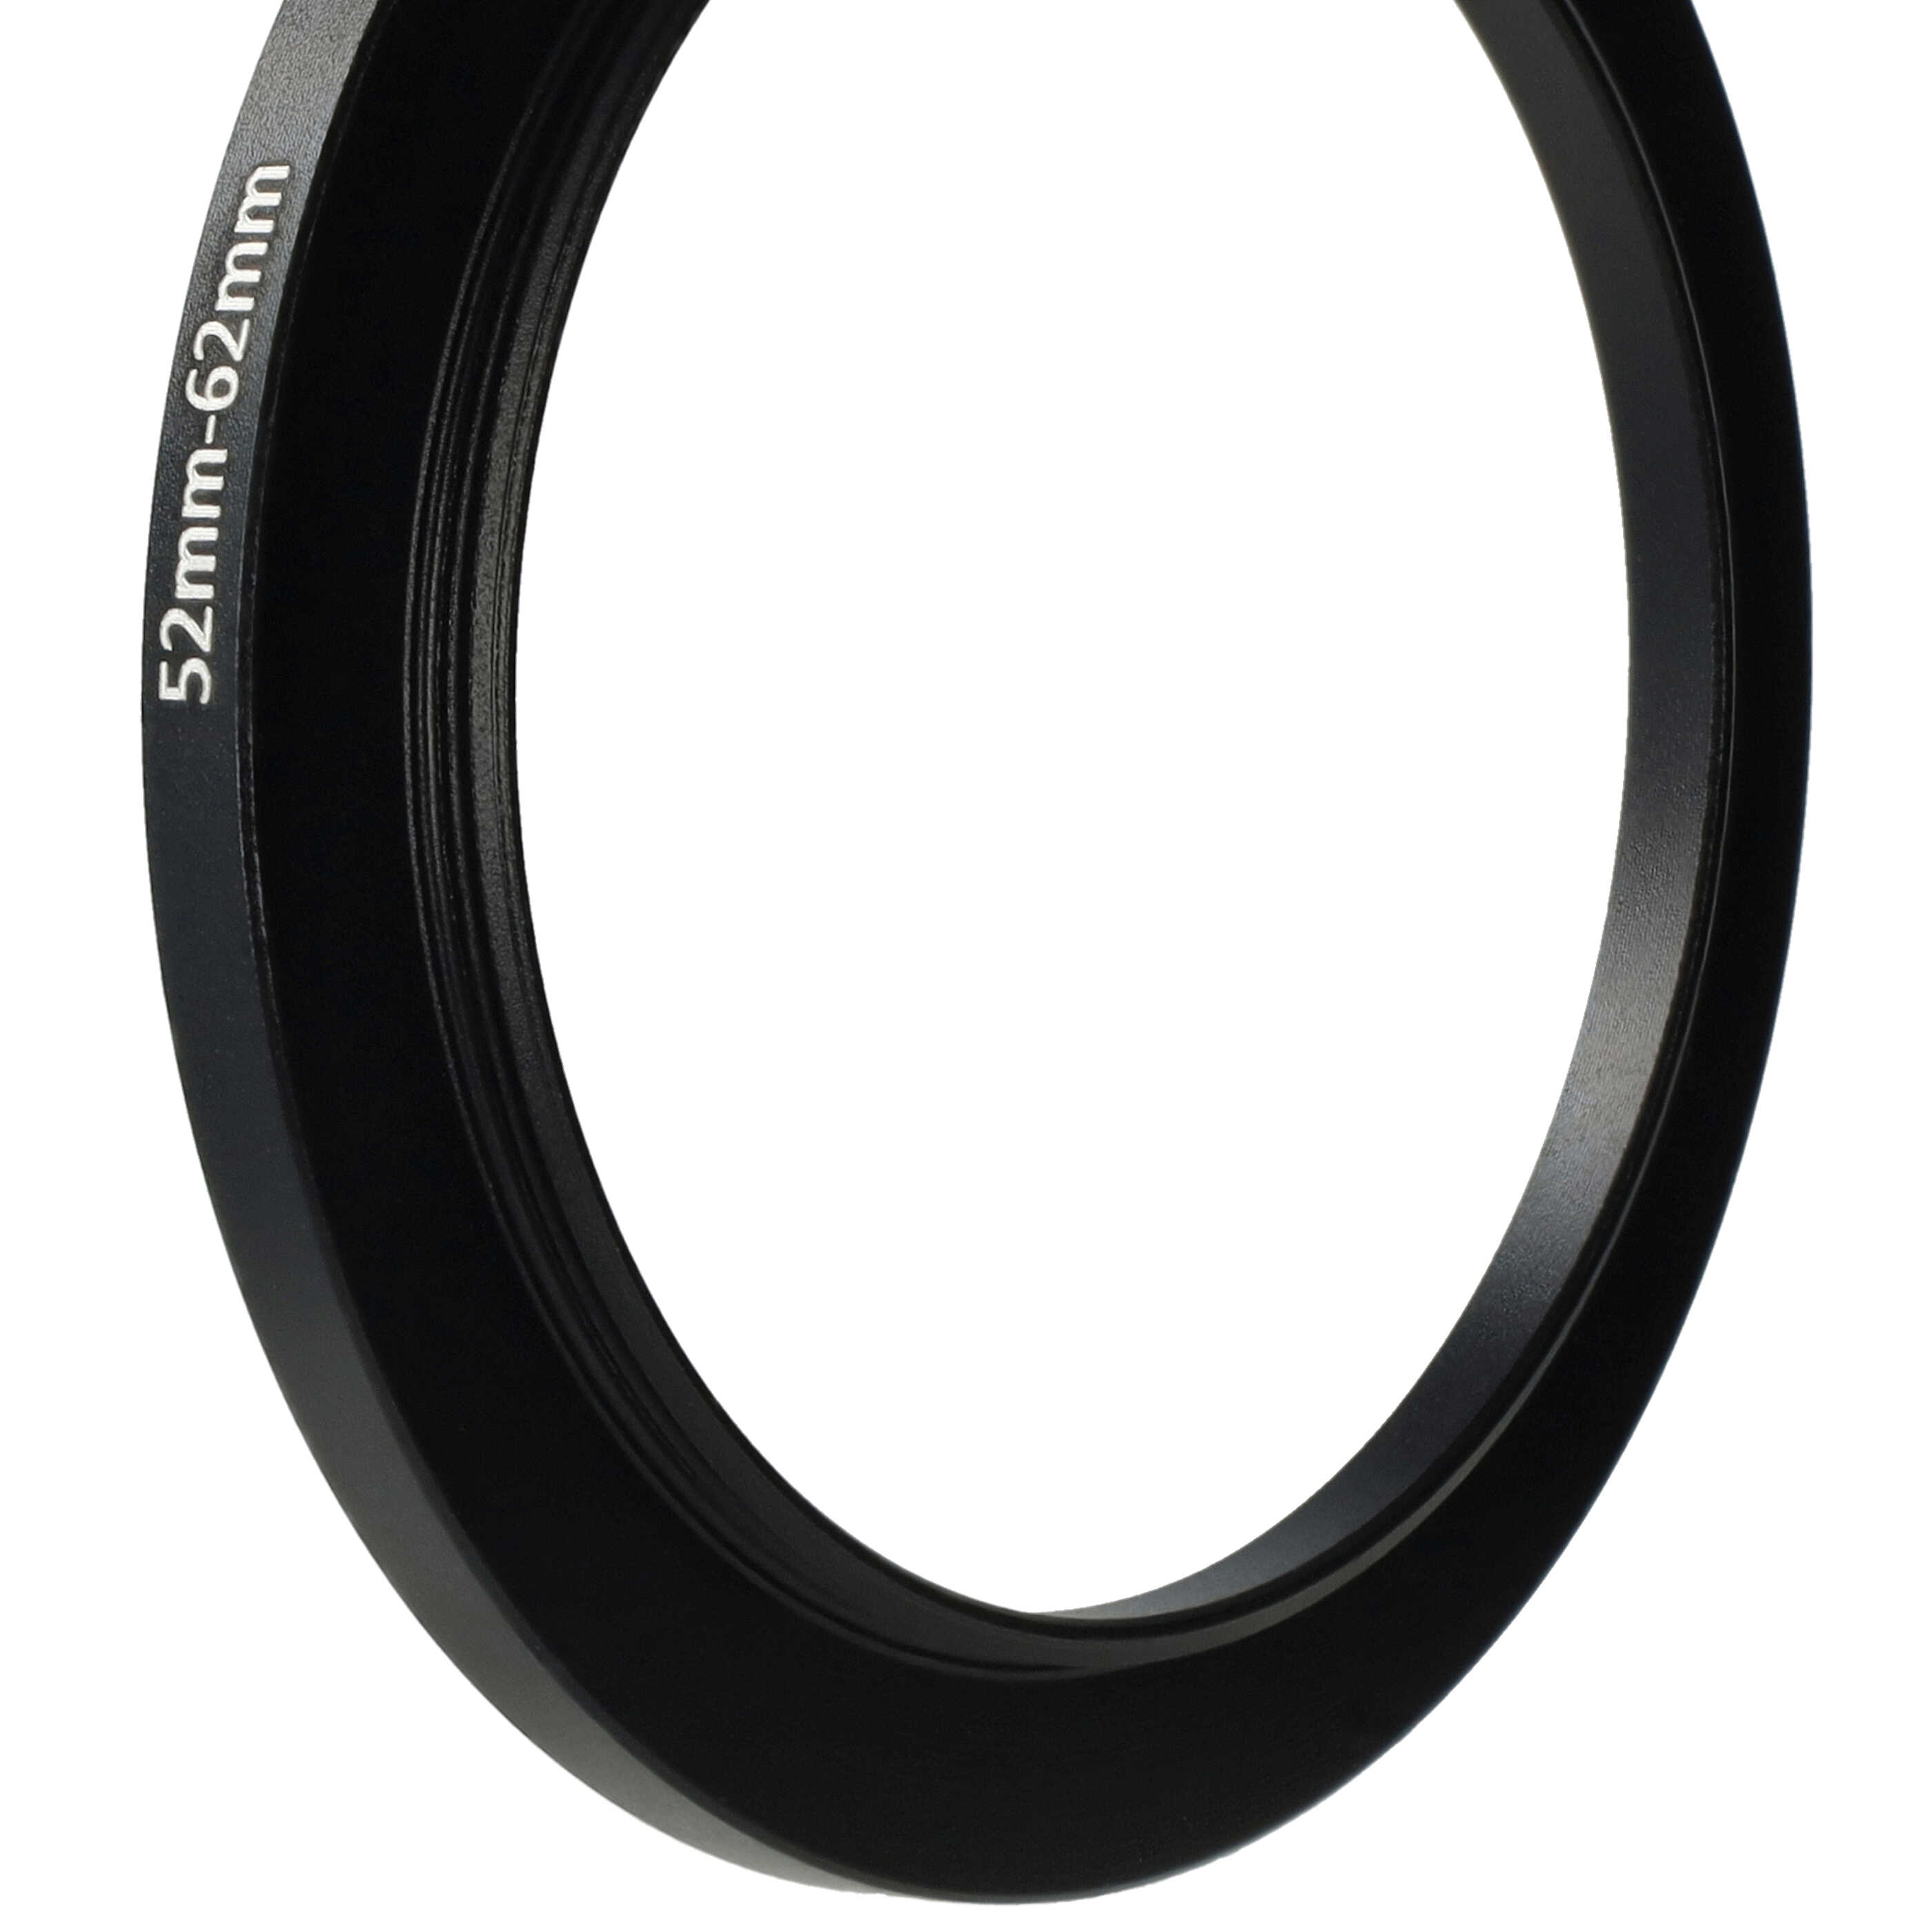 Step-Up Ring Adapter of 52 mm to 62 mmfor various Camera Lens - Filter Adapter